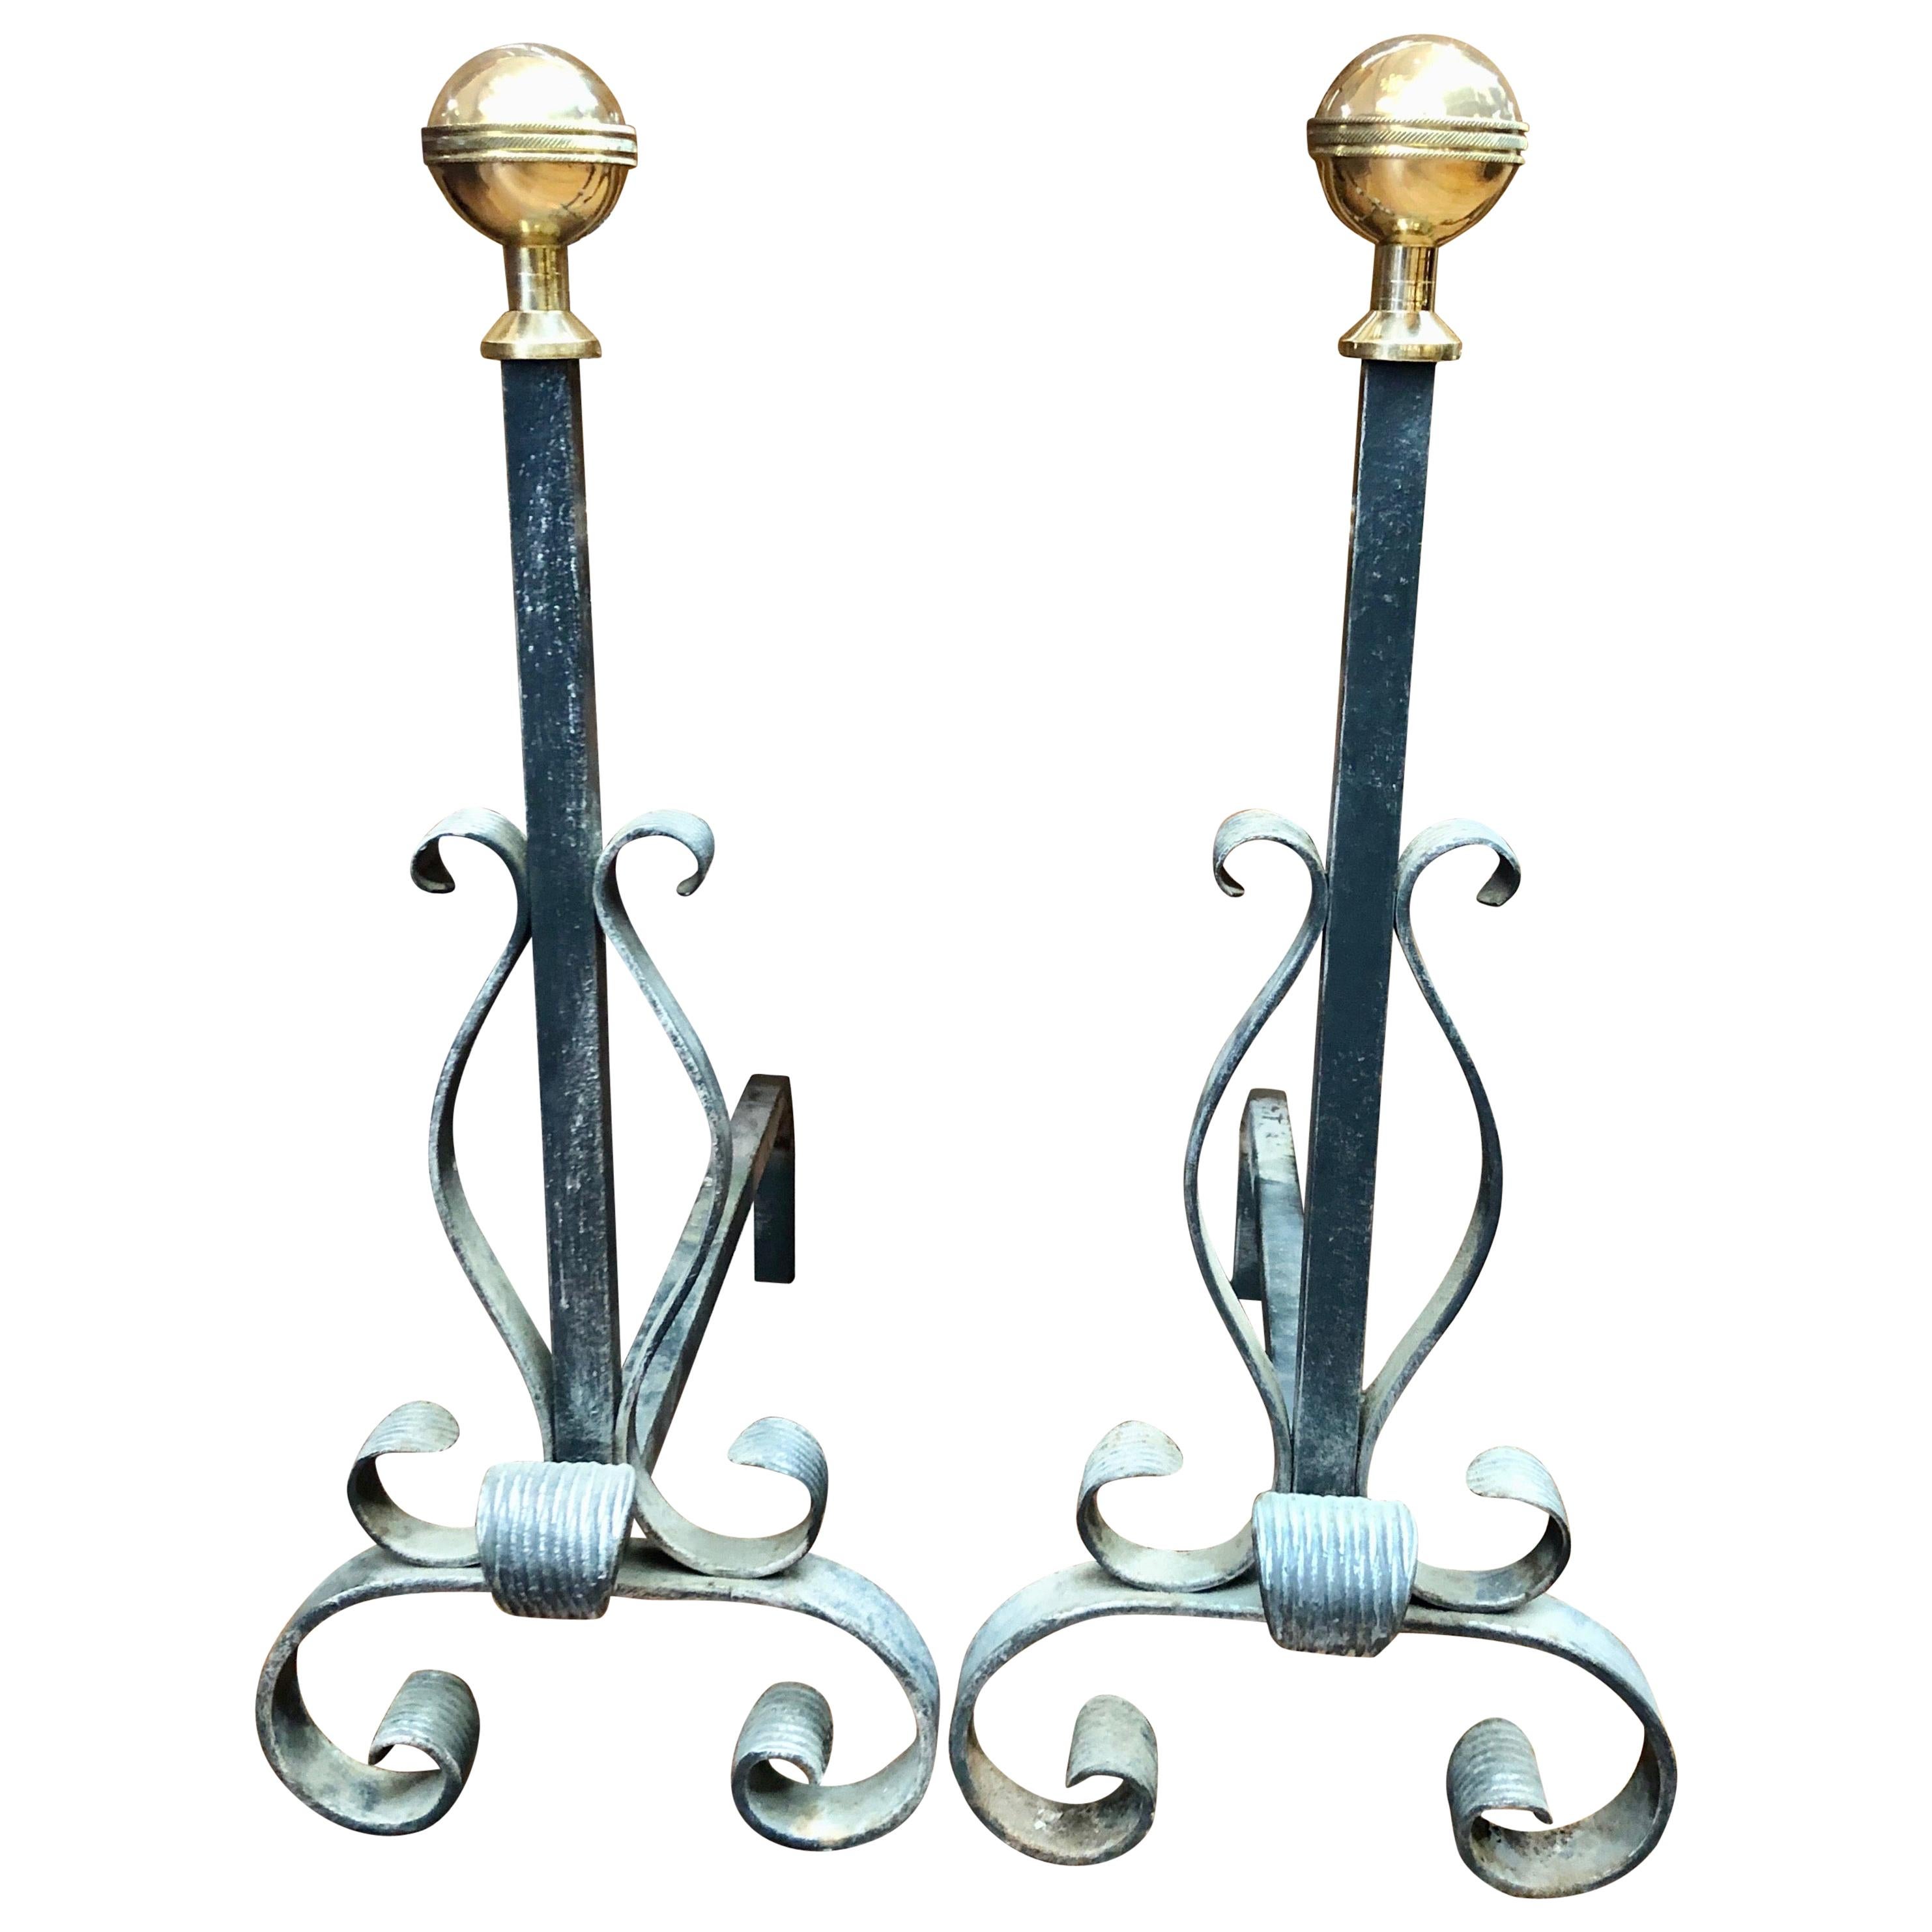 Pair of Old Handcrafted Wrought Iron Scrolled Leaf and Brass Ball Andirons